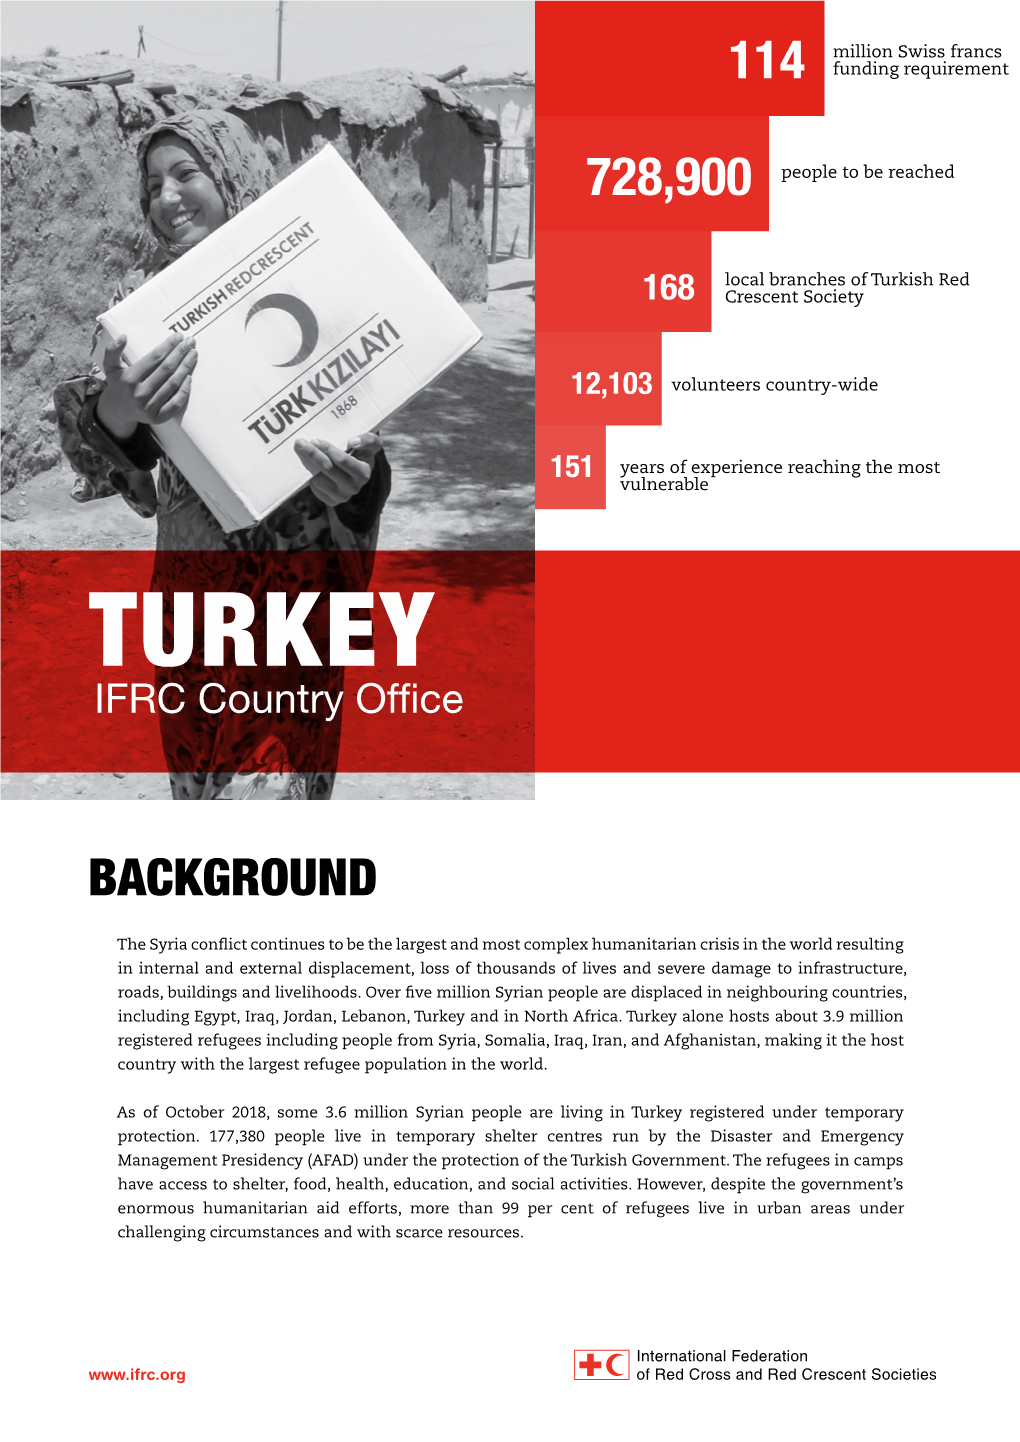 TURKEYIFRC Country Office